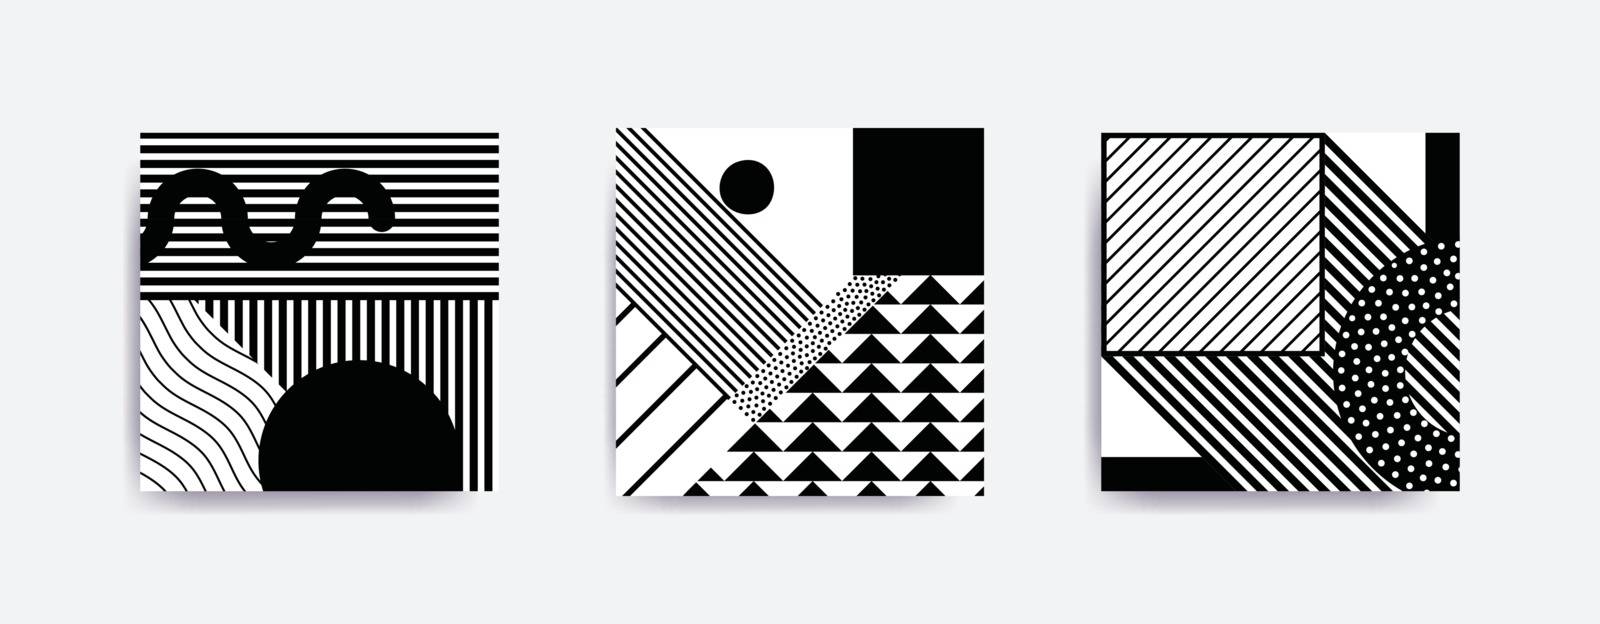 Black and white trendy geometric poster set juxtaposed with bright bold blocks of color zig zags, squiggles, erratic images. Design background elements composition. Magazine, leaflet, billboard